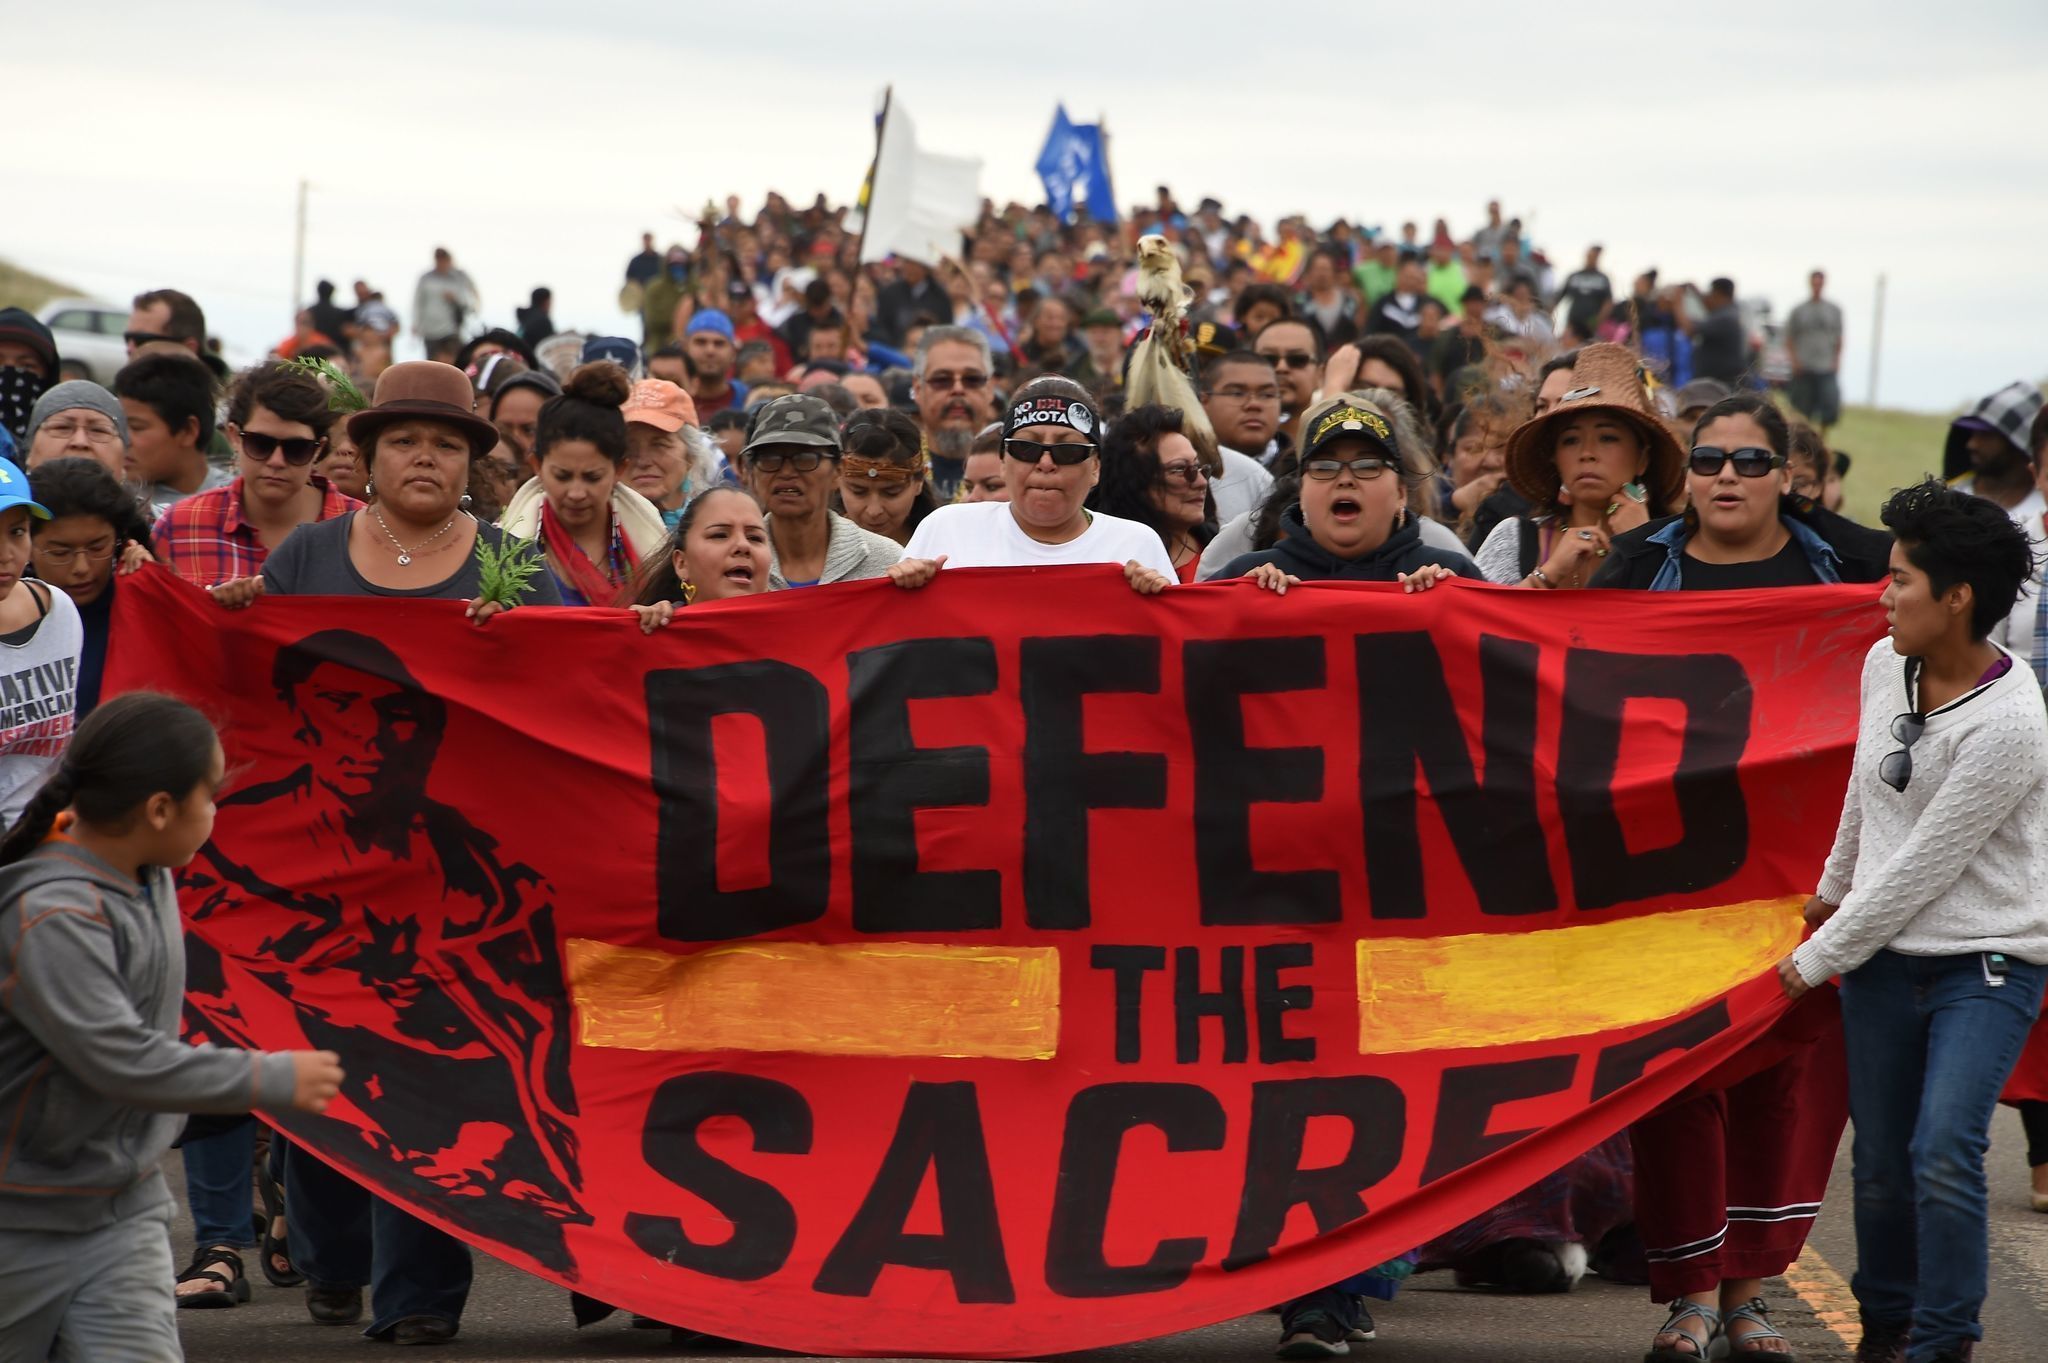 Why your Facebook Friends are ‘Checking In’ at Standing Rock